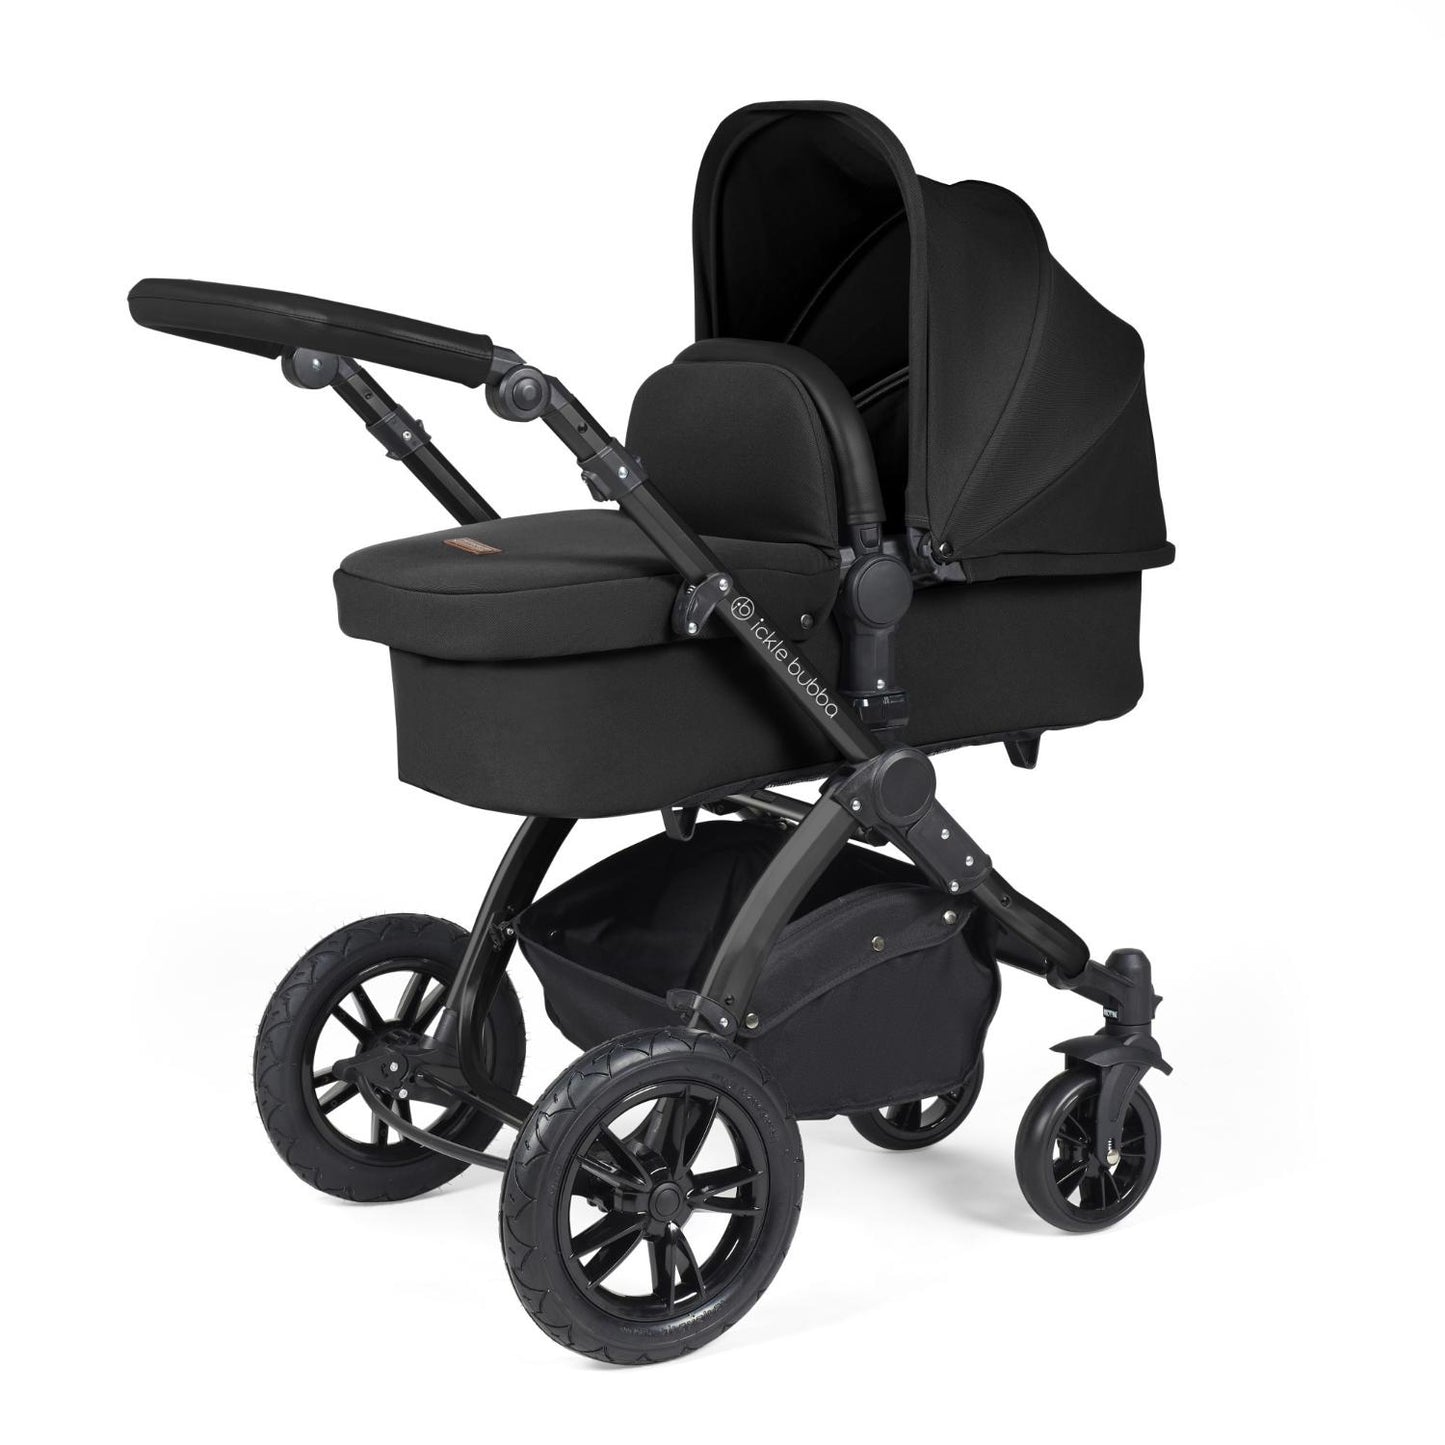 Ickle Bubba Stomp Luxe Pushchair with carrycot attached in Midnight black colour